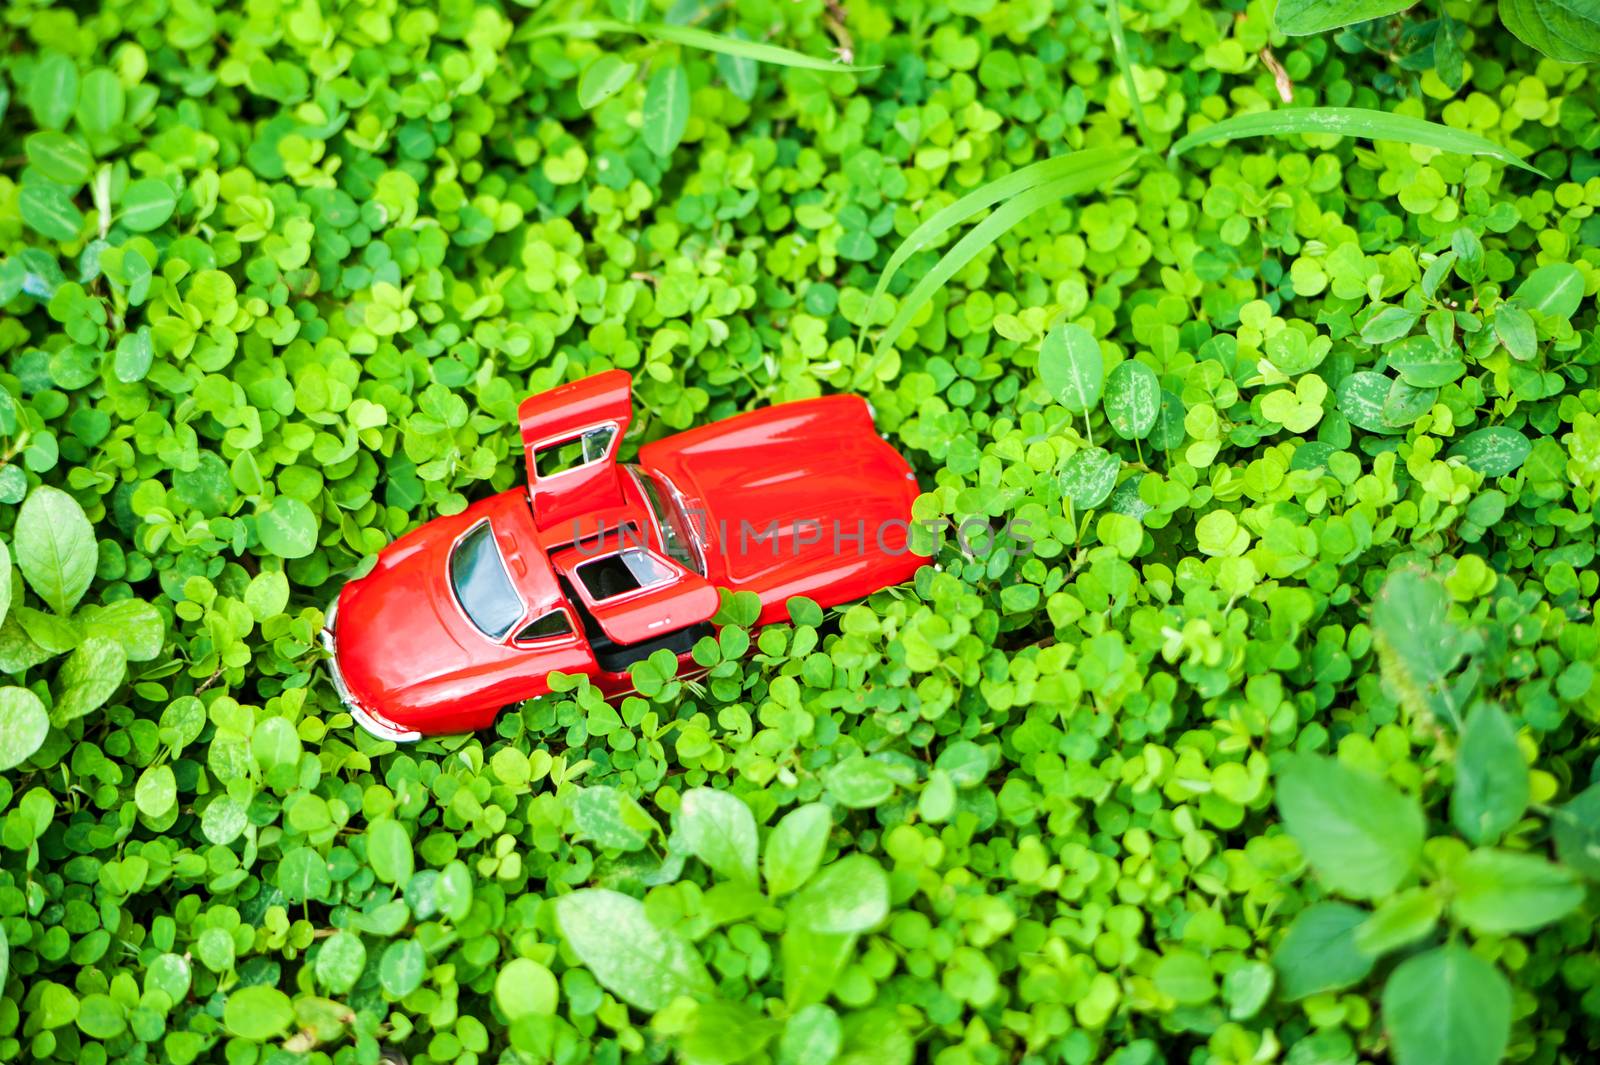 Sport car model in nature place . by panumazz@gmail.com